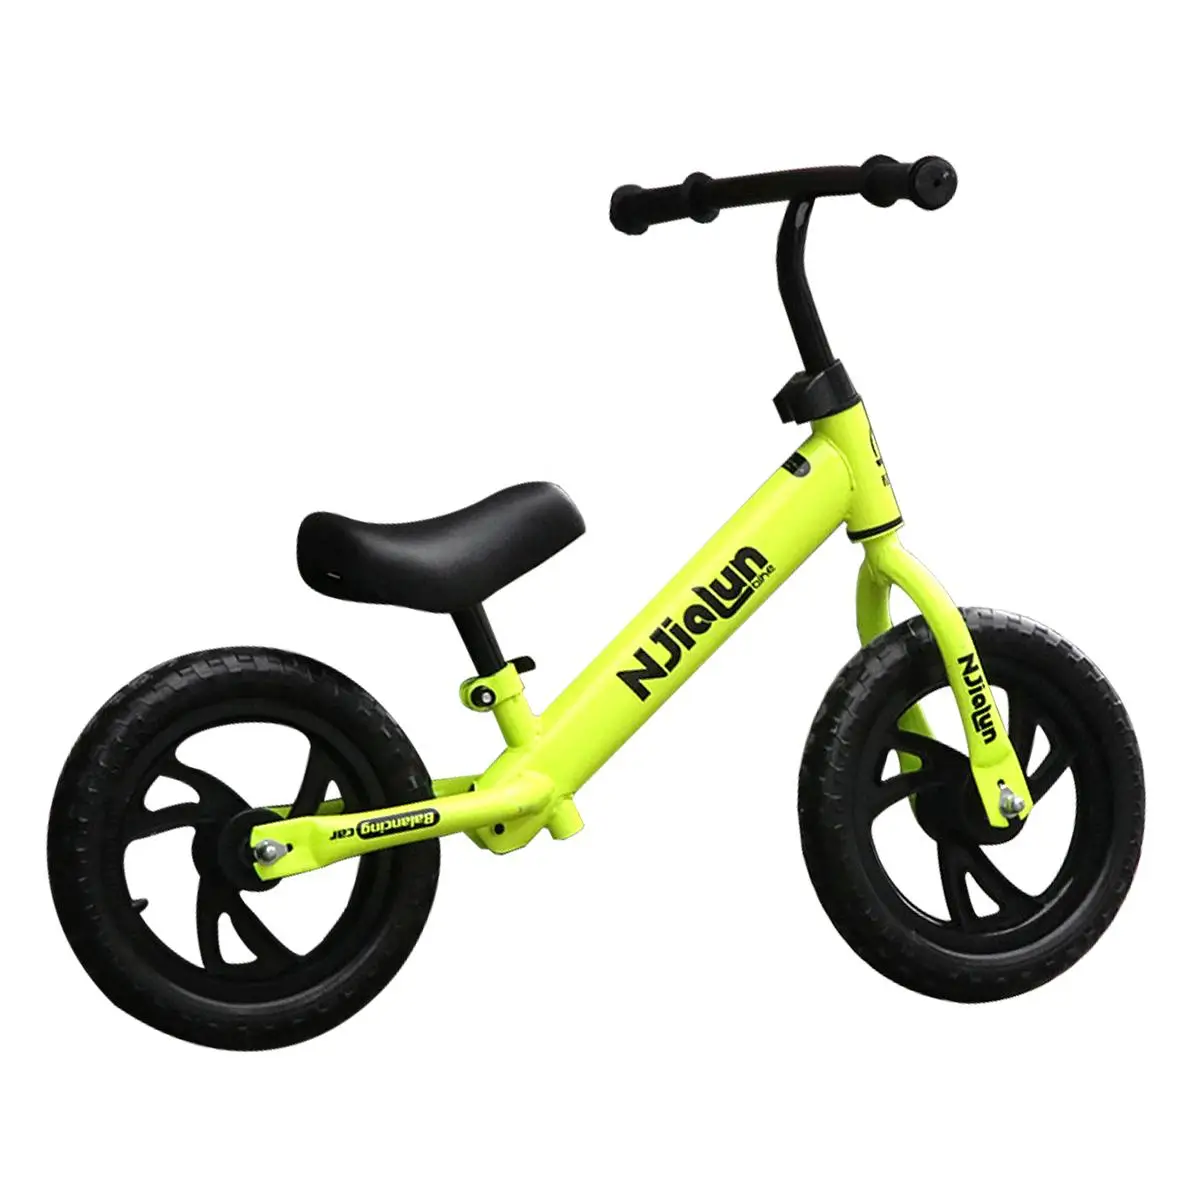 Kid Balance Training 12" Bike No-Pedal Learn To Ride Pre Push Bicycle Children 